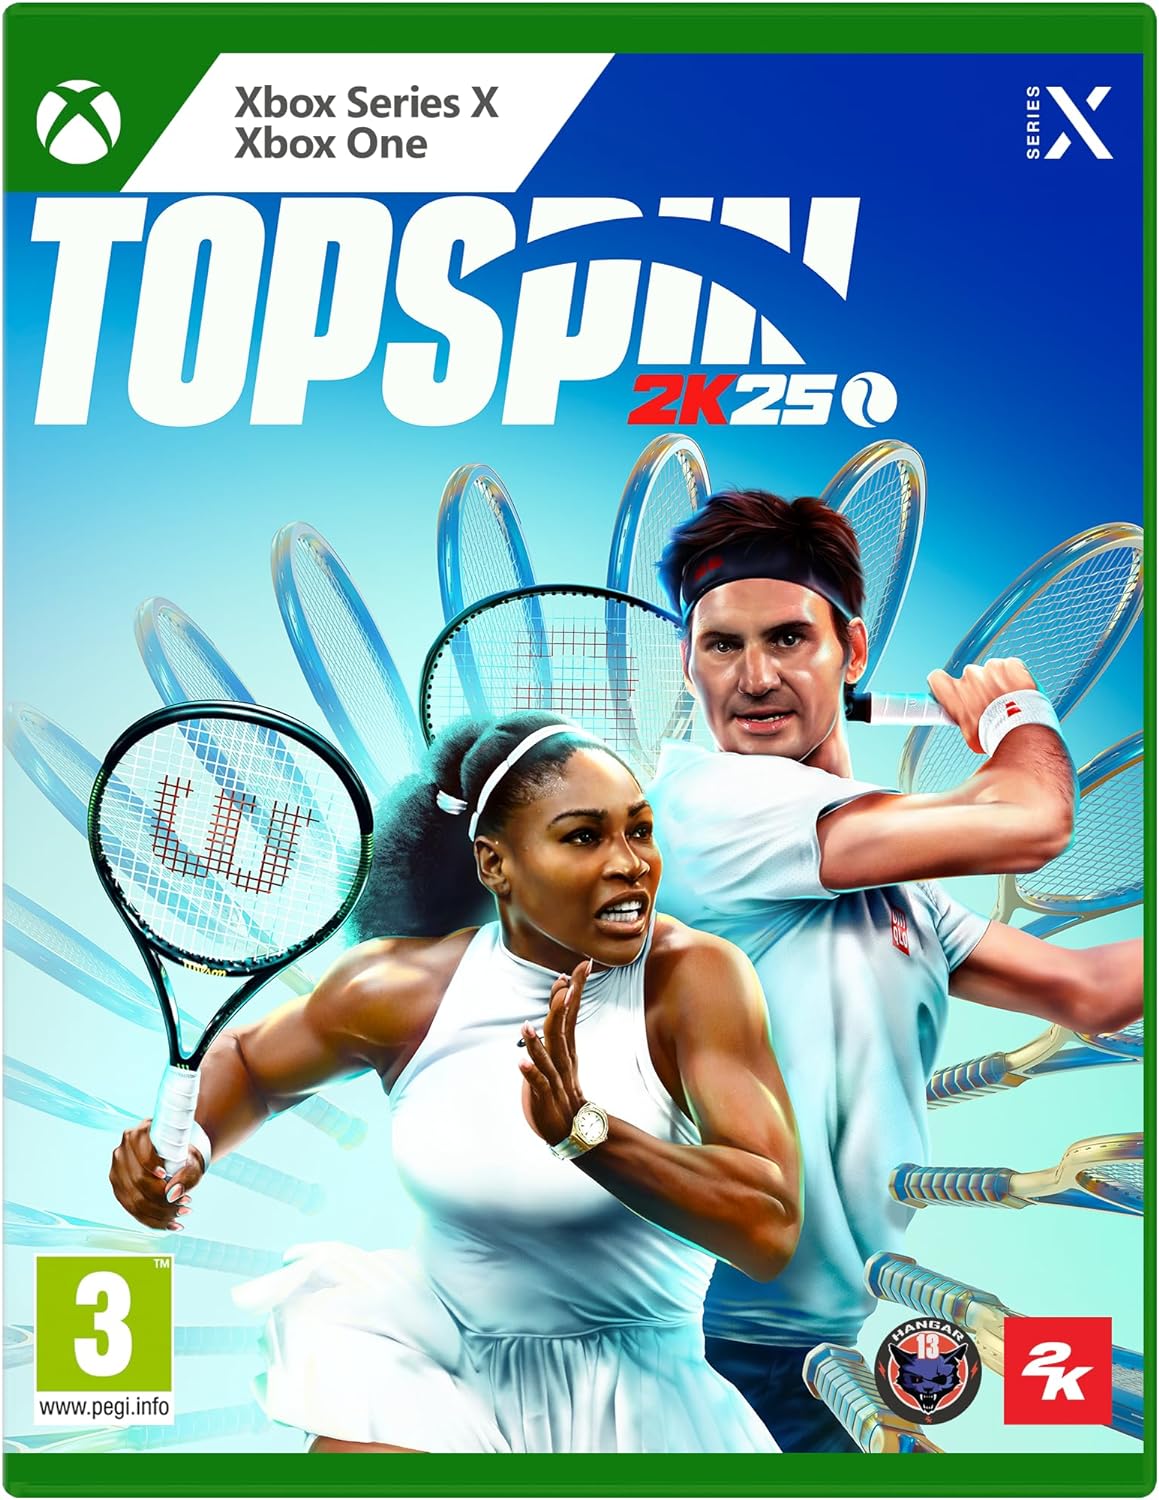 TopSpin 2K25 Deluxe Edition Key (Xbox One/Series X): Europe